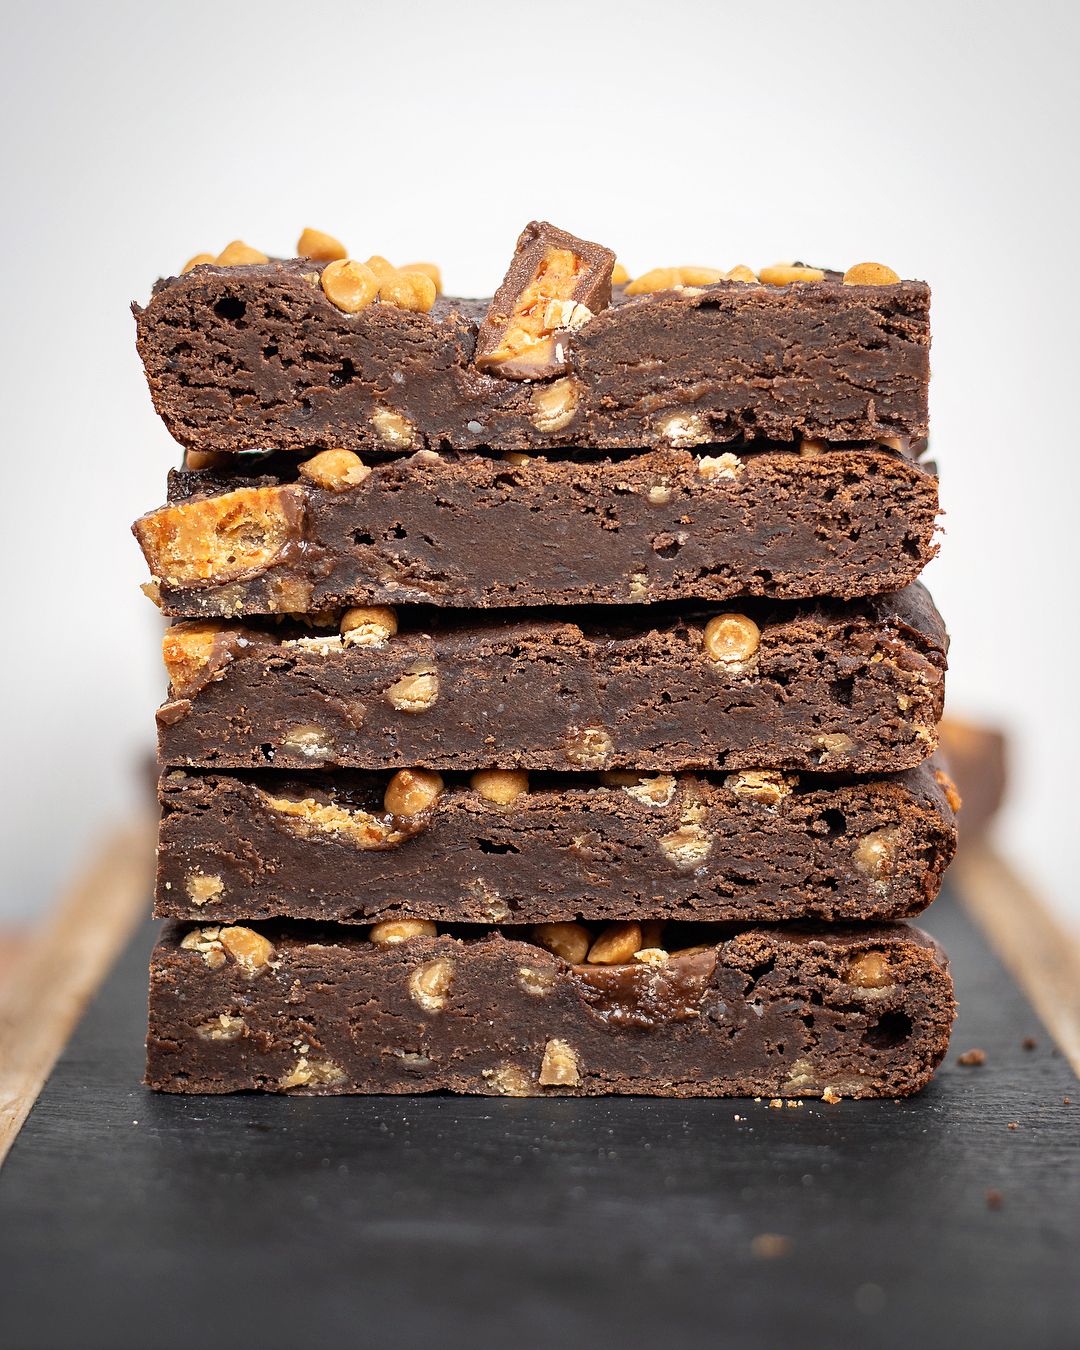 Protein Brownie Recipe